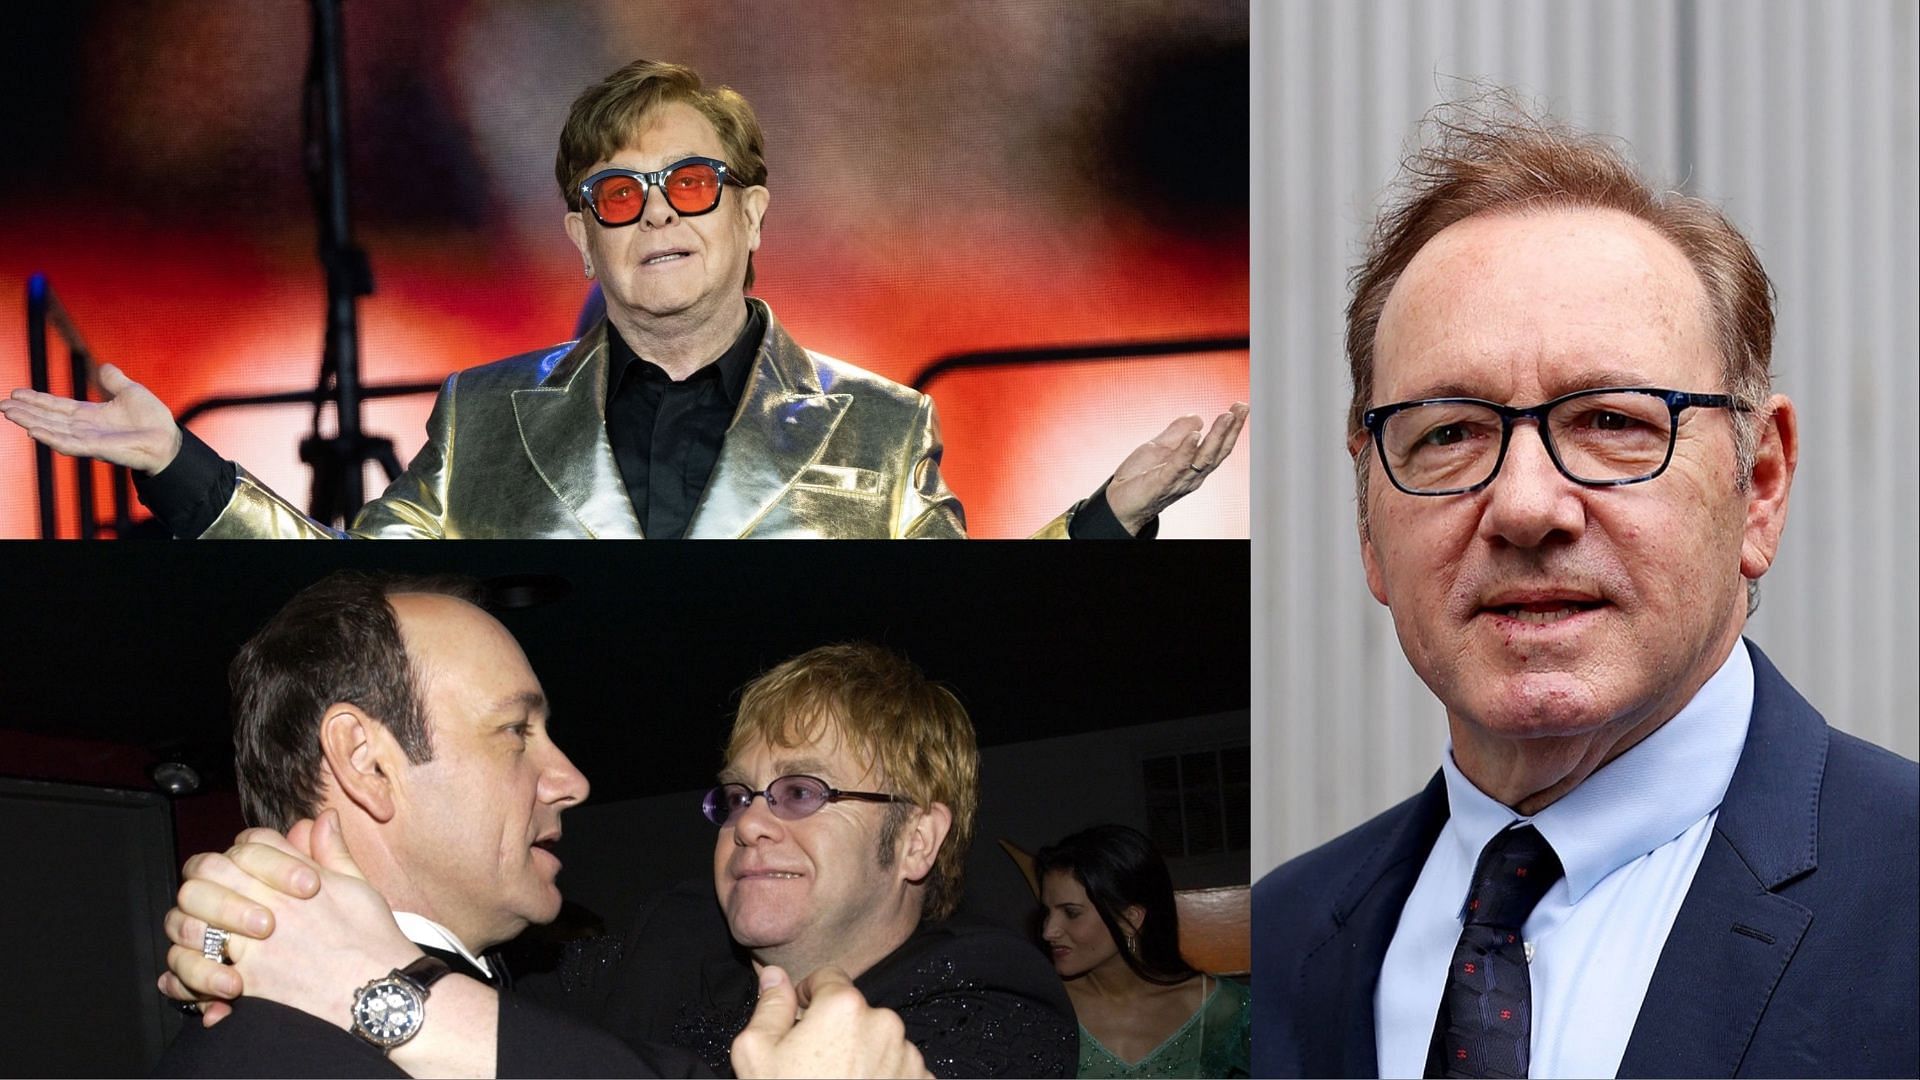 Elton John testifies for his friend Kevin Spacey via video link at Southwark Crown Court (Images via Getty Images)